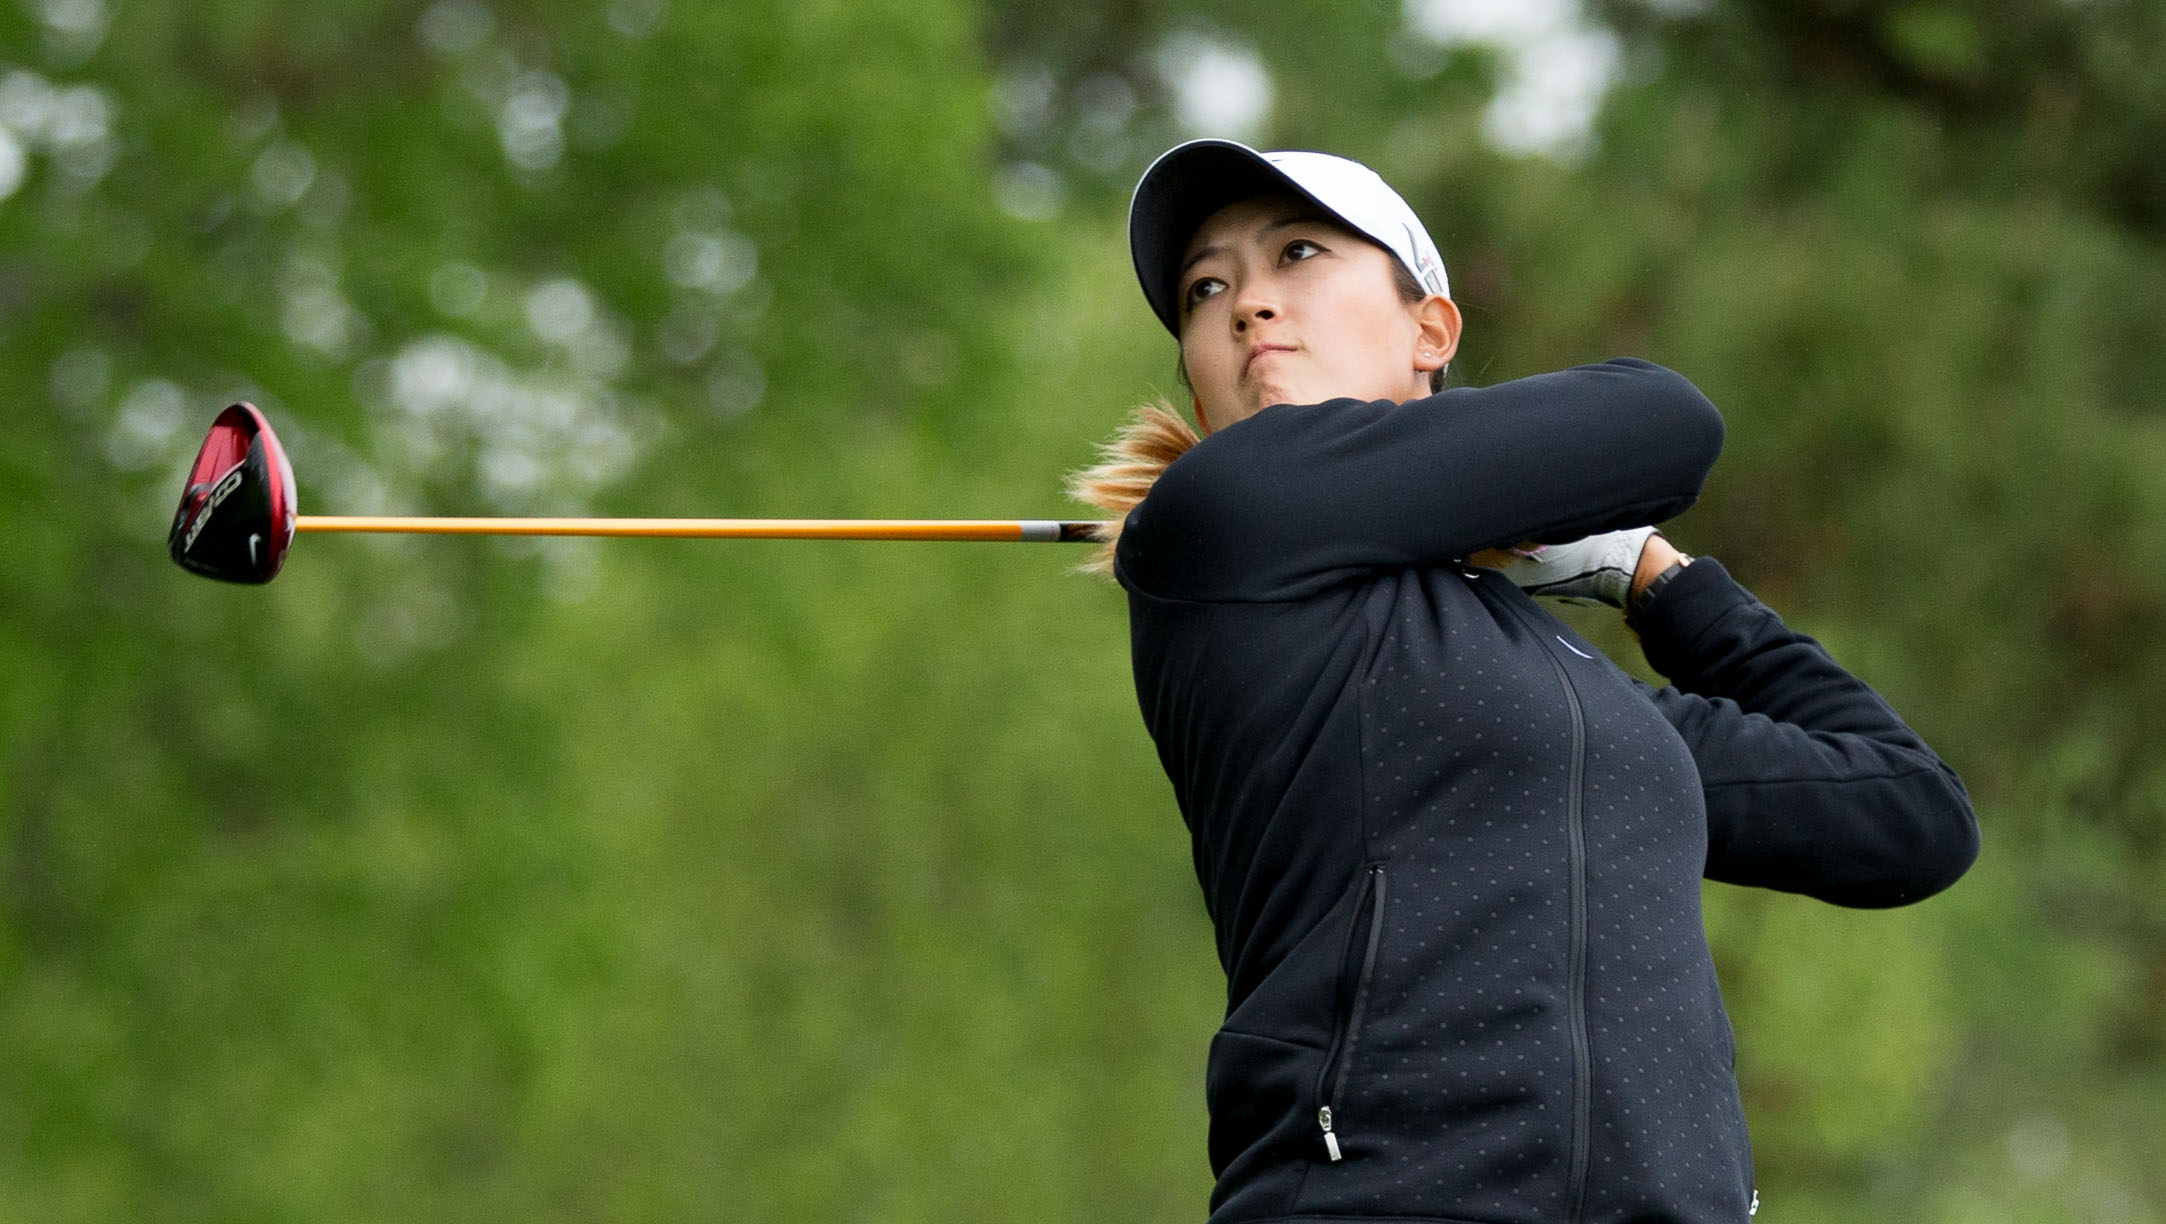 Michelle Wie’s first golf instructor recalls pro’s early years